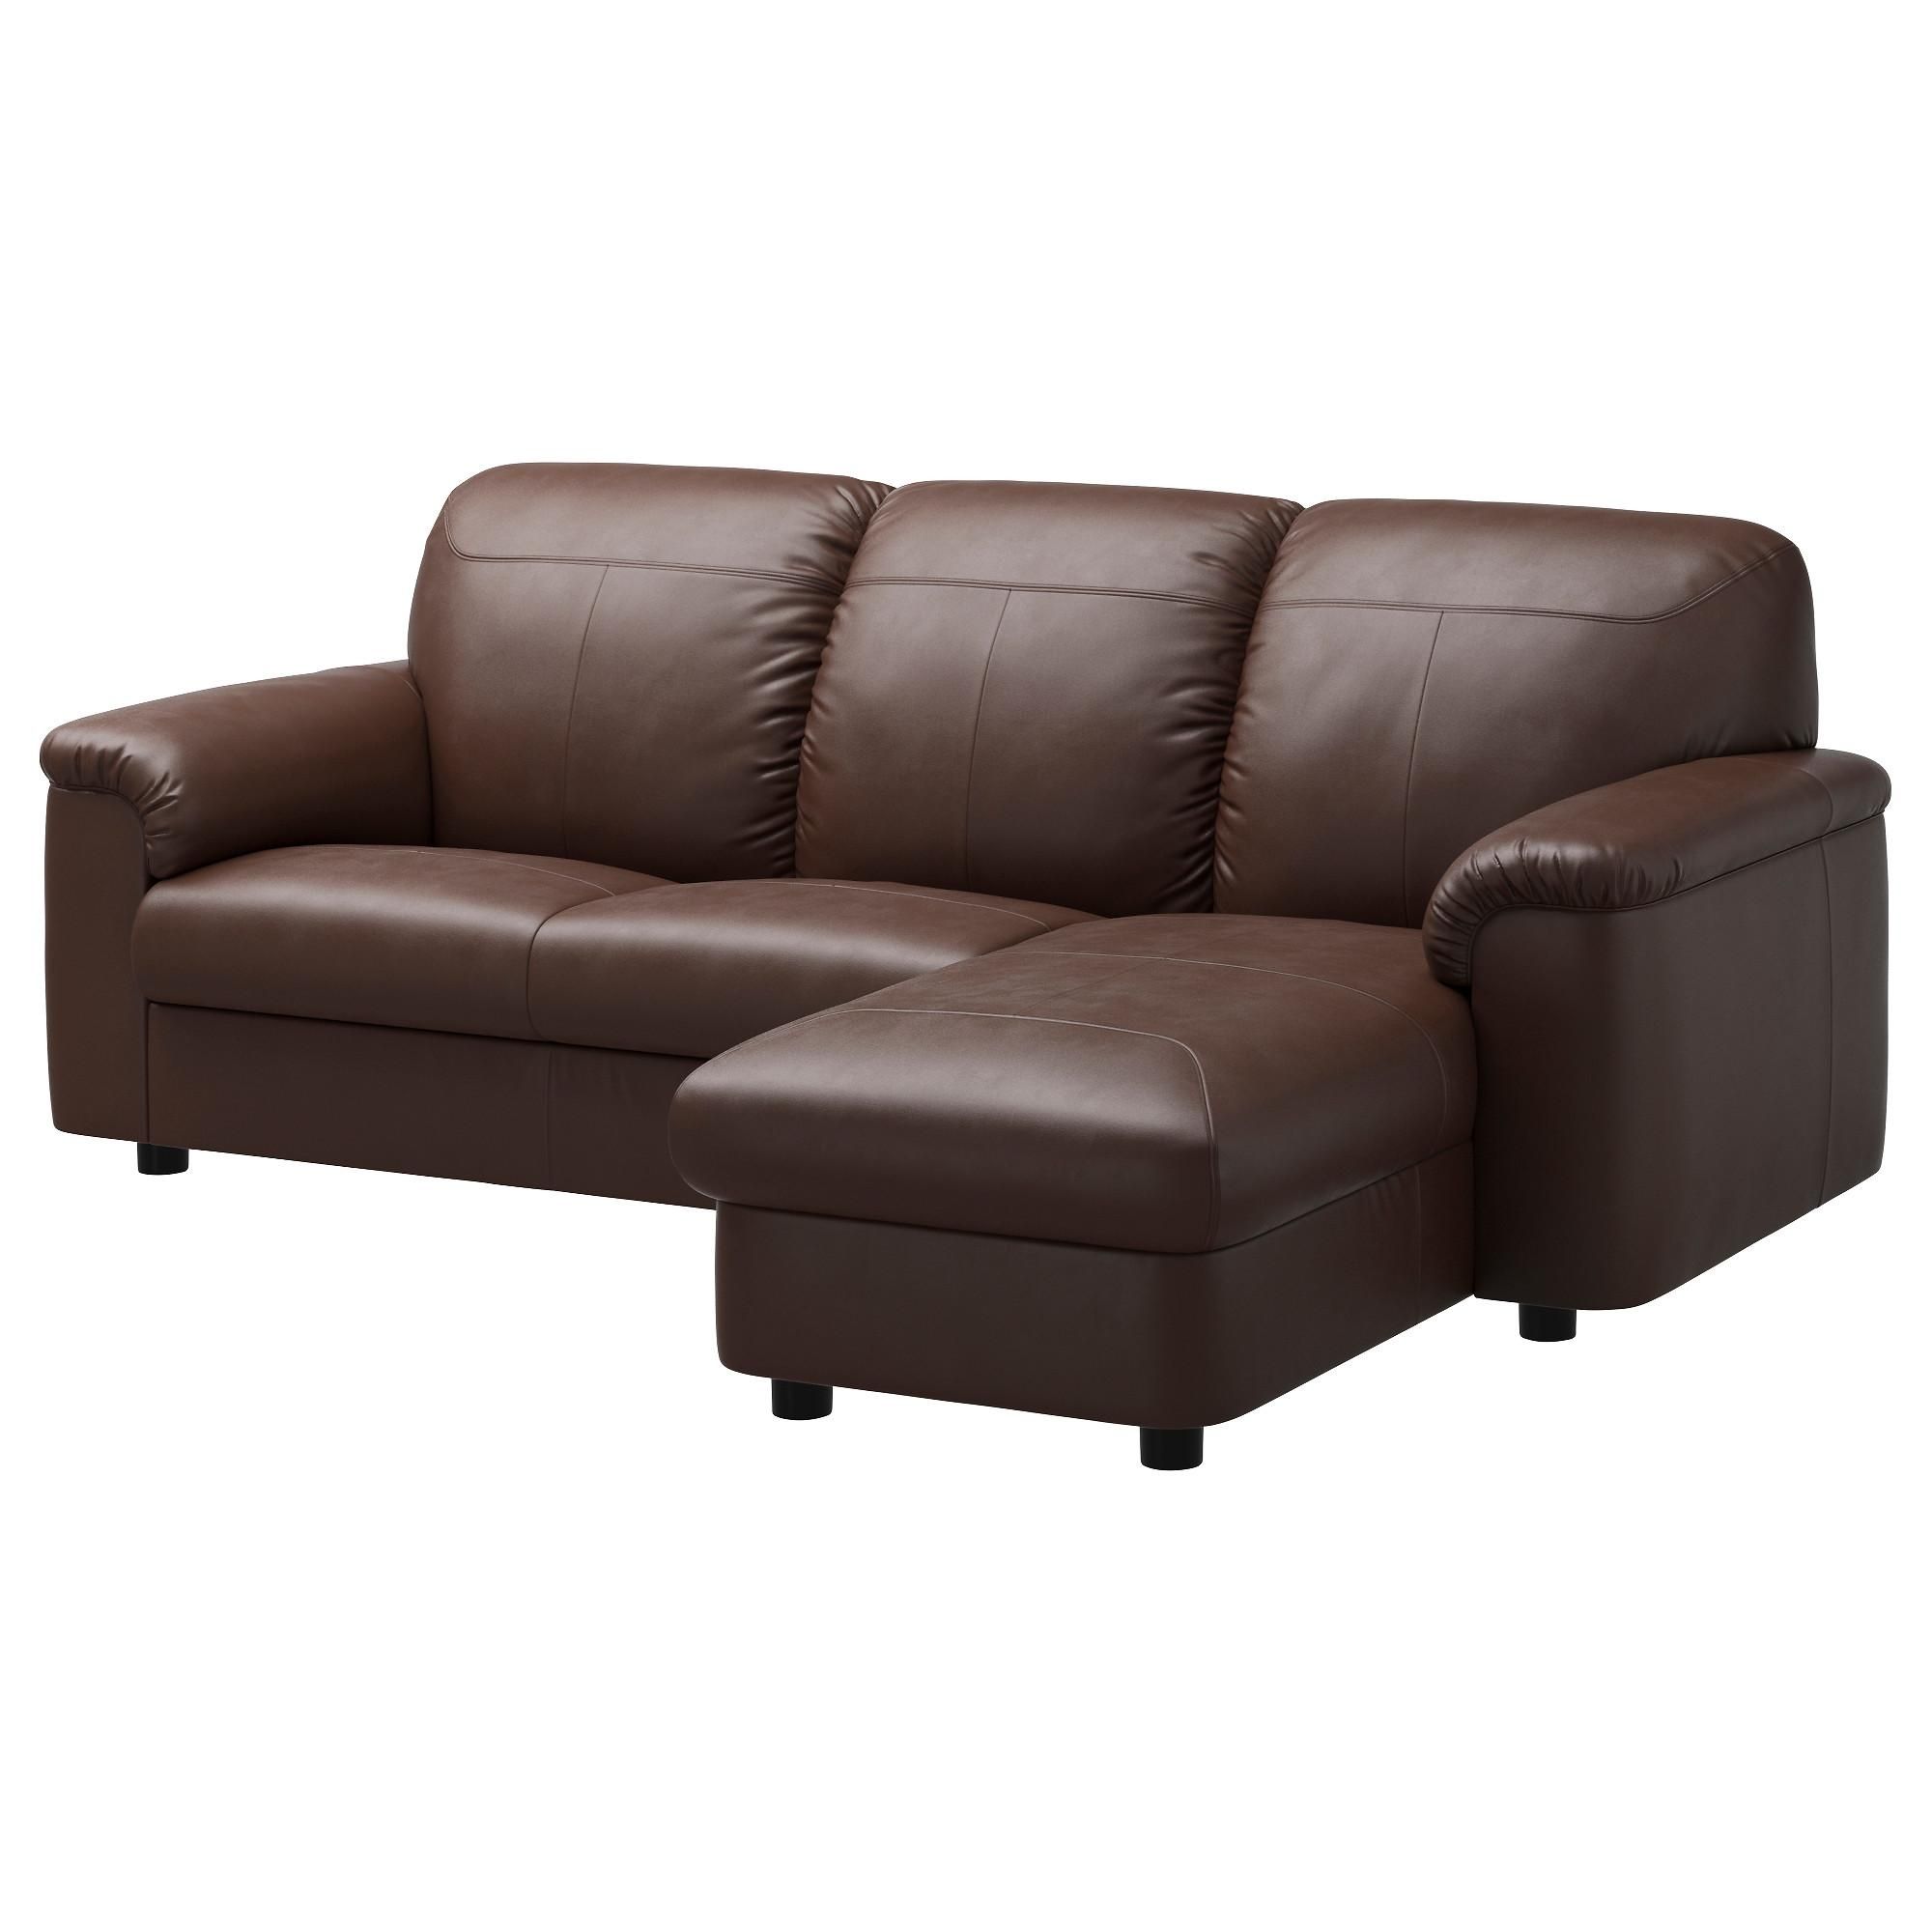 Leather & Faux Leather Couches, Chairs & Ottomans – Ikea Within Leather Lounge Sofas (View 10 of 20)